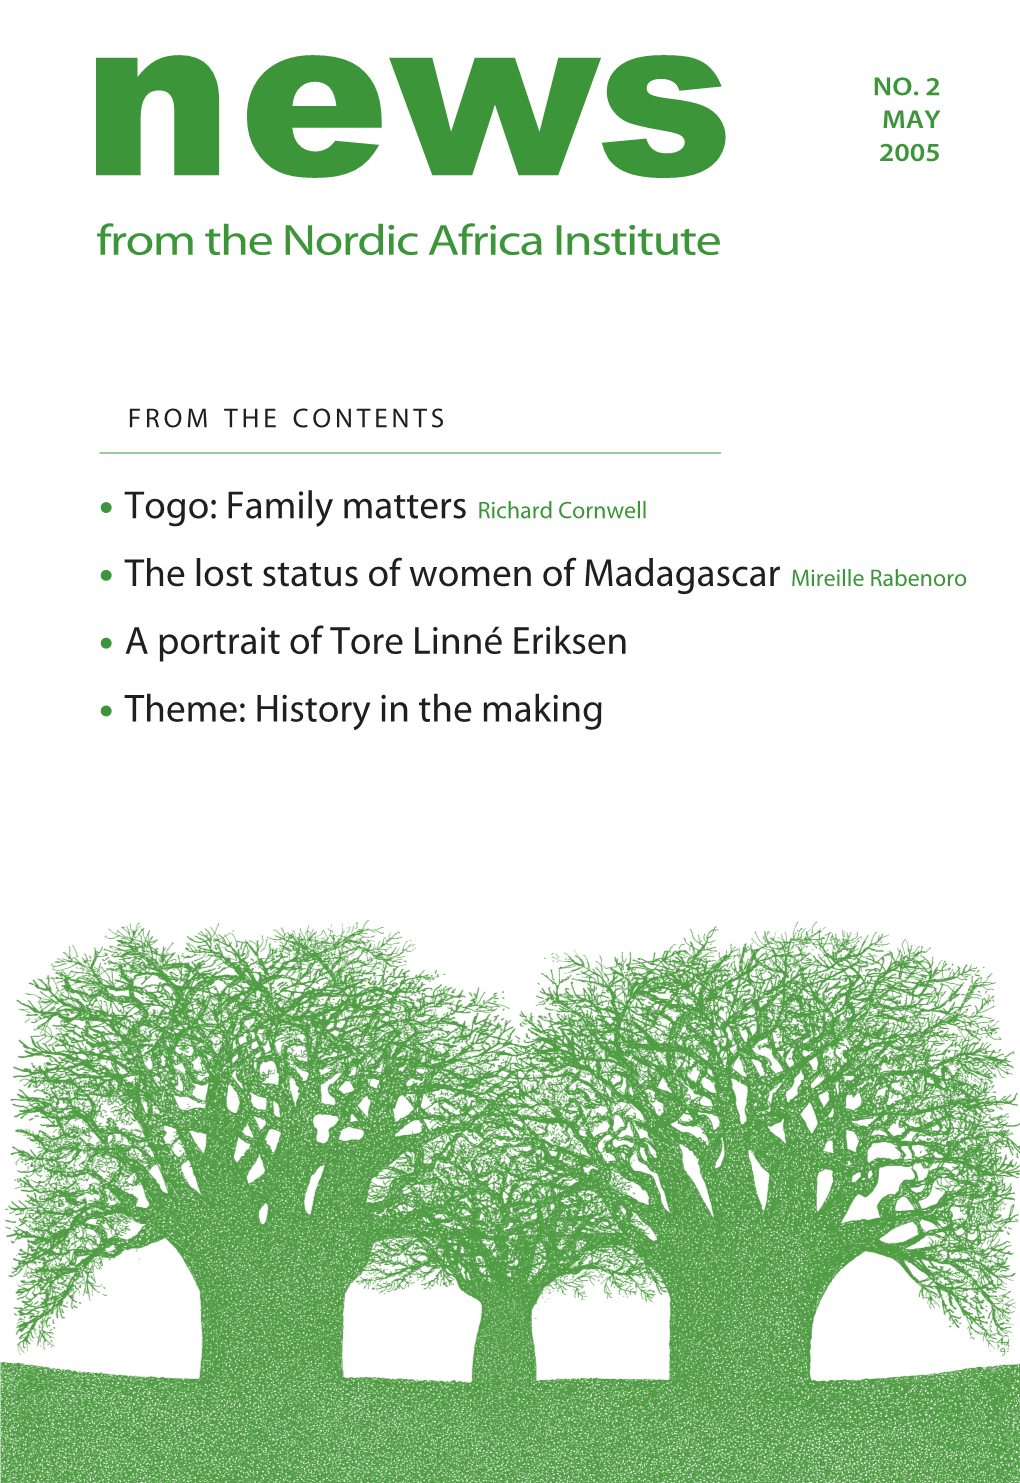 From the Nordic Africa Institute